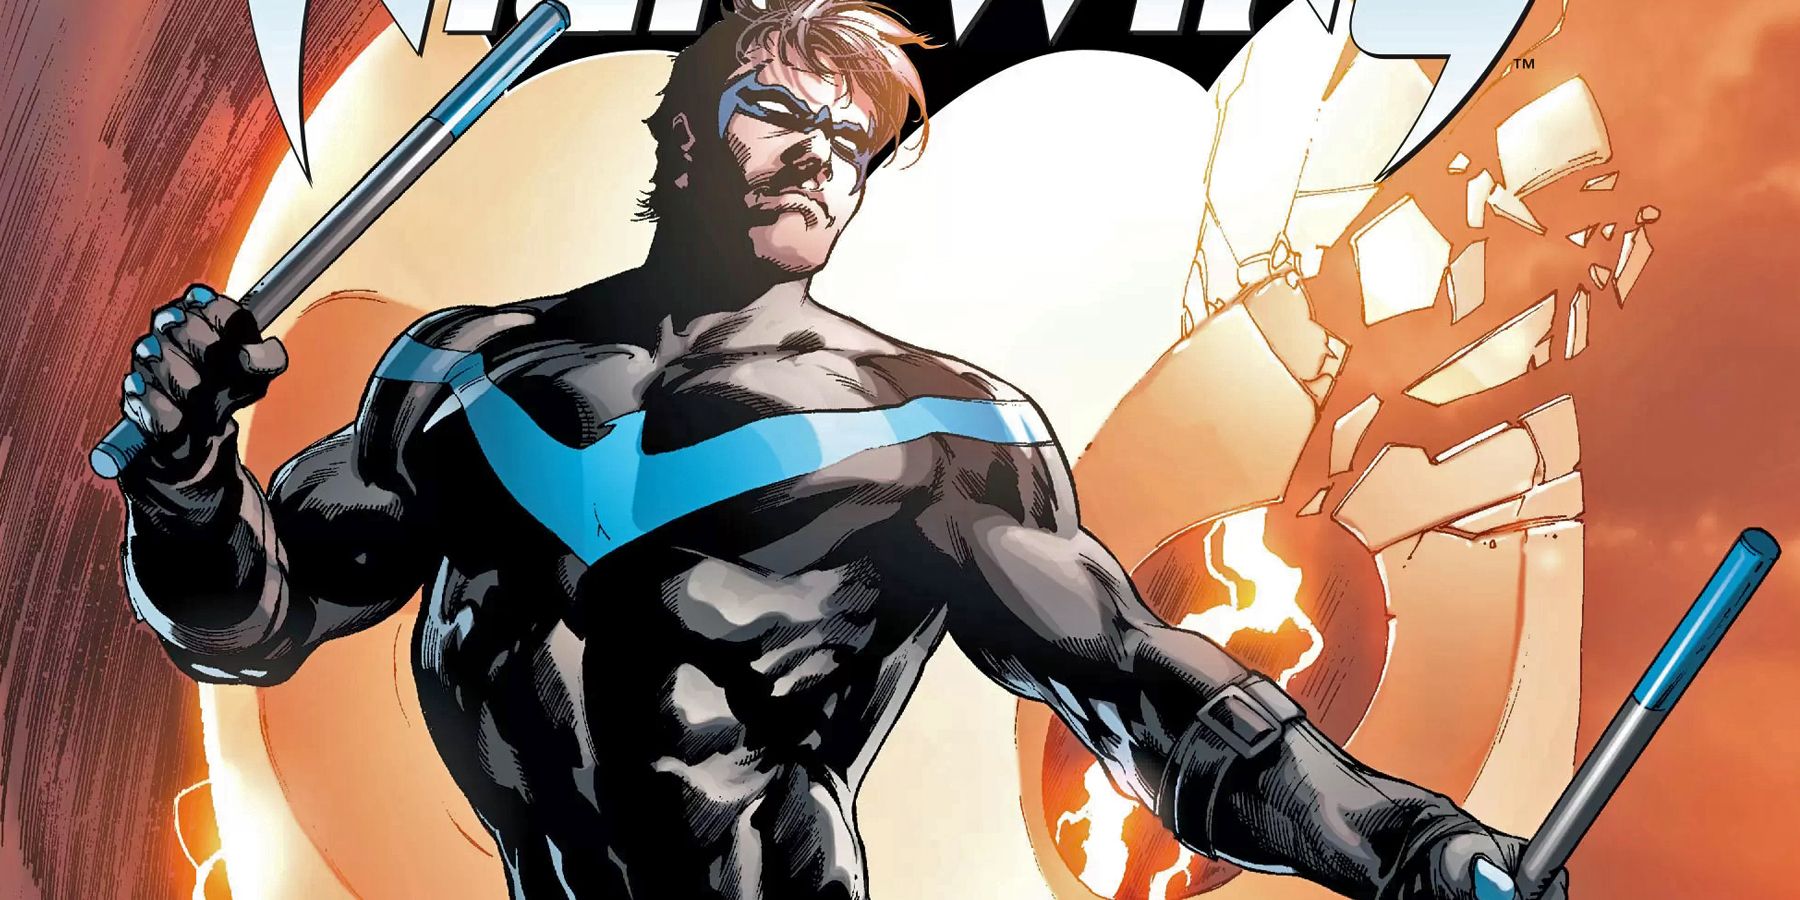 Grayson's Anatomy: 15 Weird Facts About Nightwing's Body